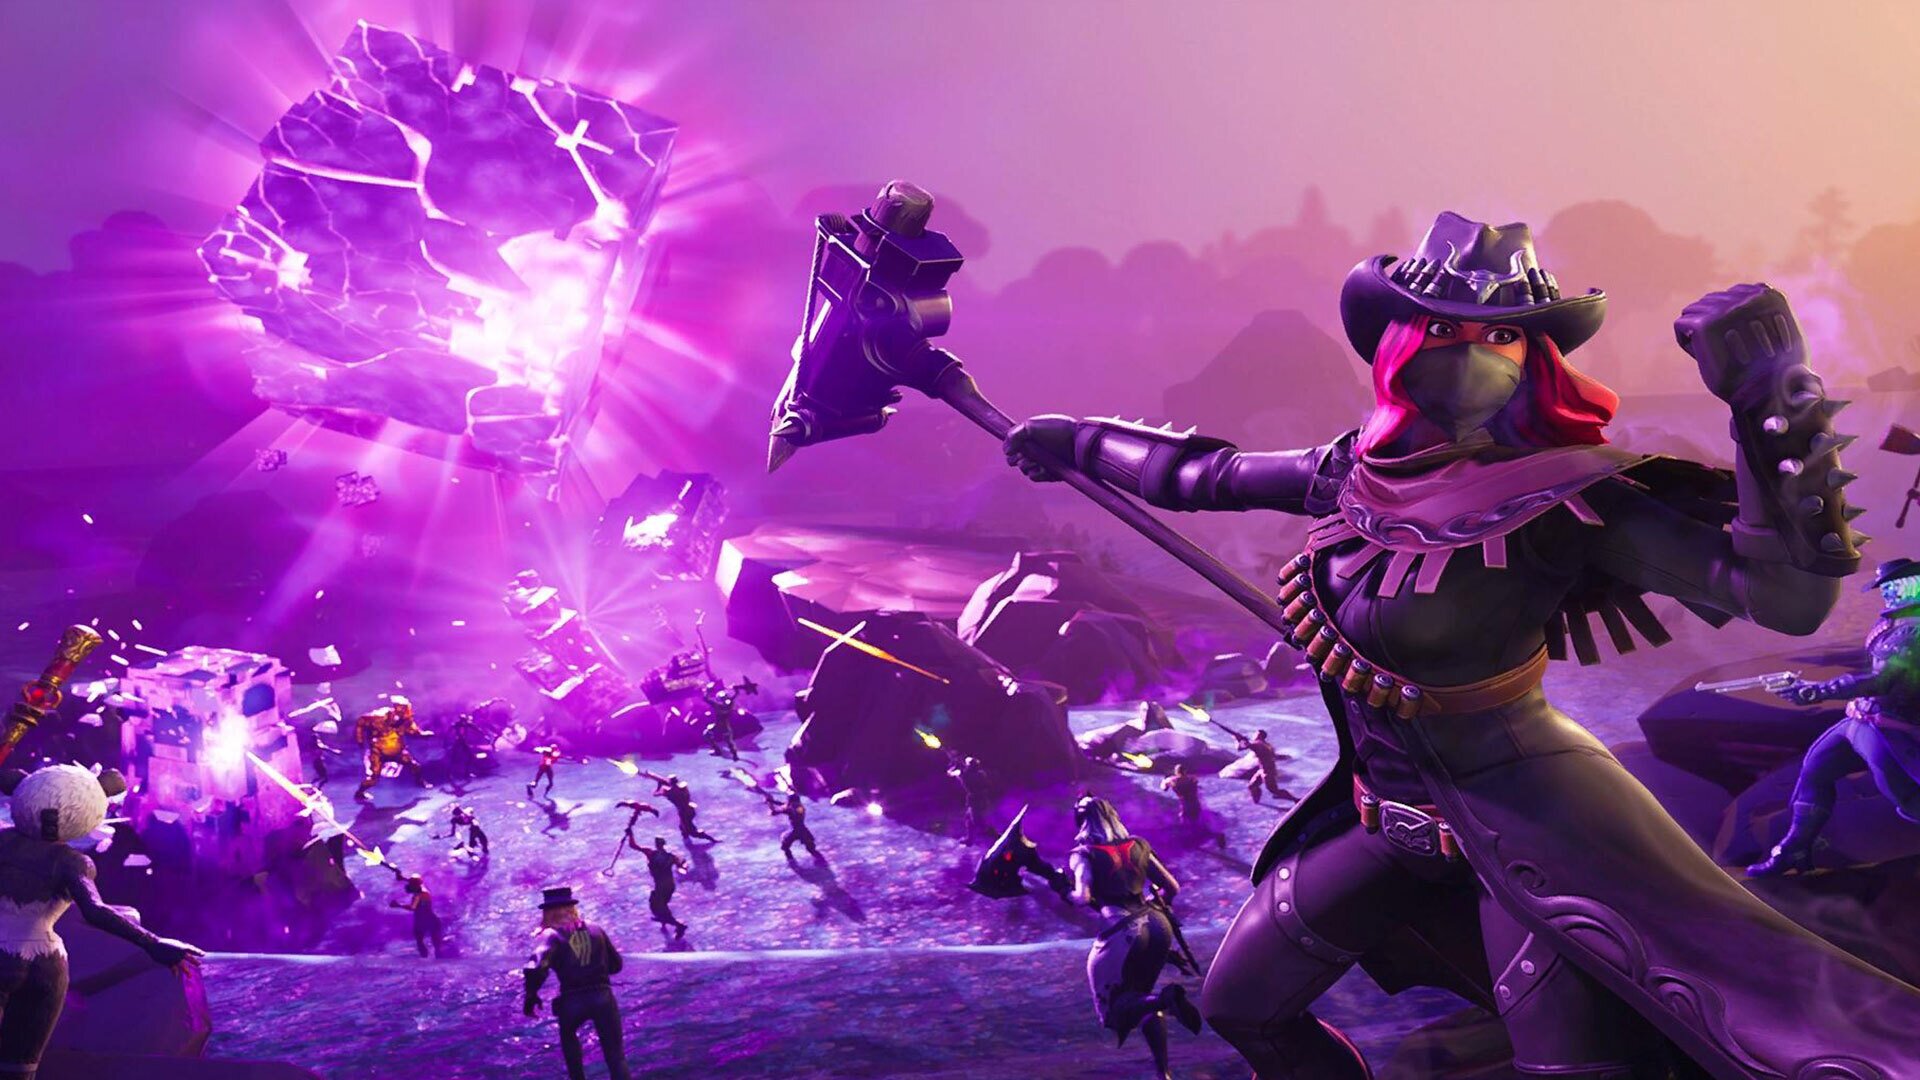 The Fortnite Open will be held on December 15 at Korea University’s gym and will include such players as Tfue, Cloakzy, and Myth.